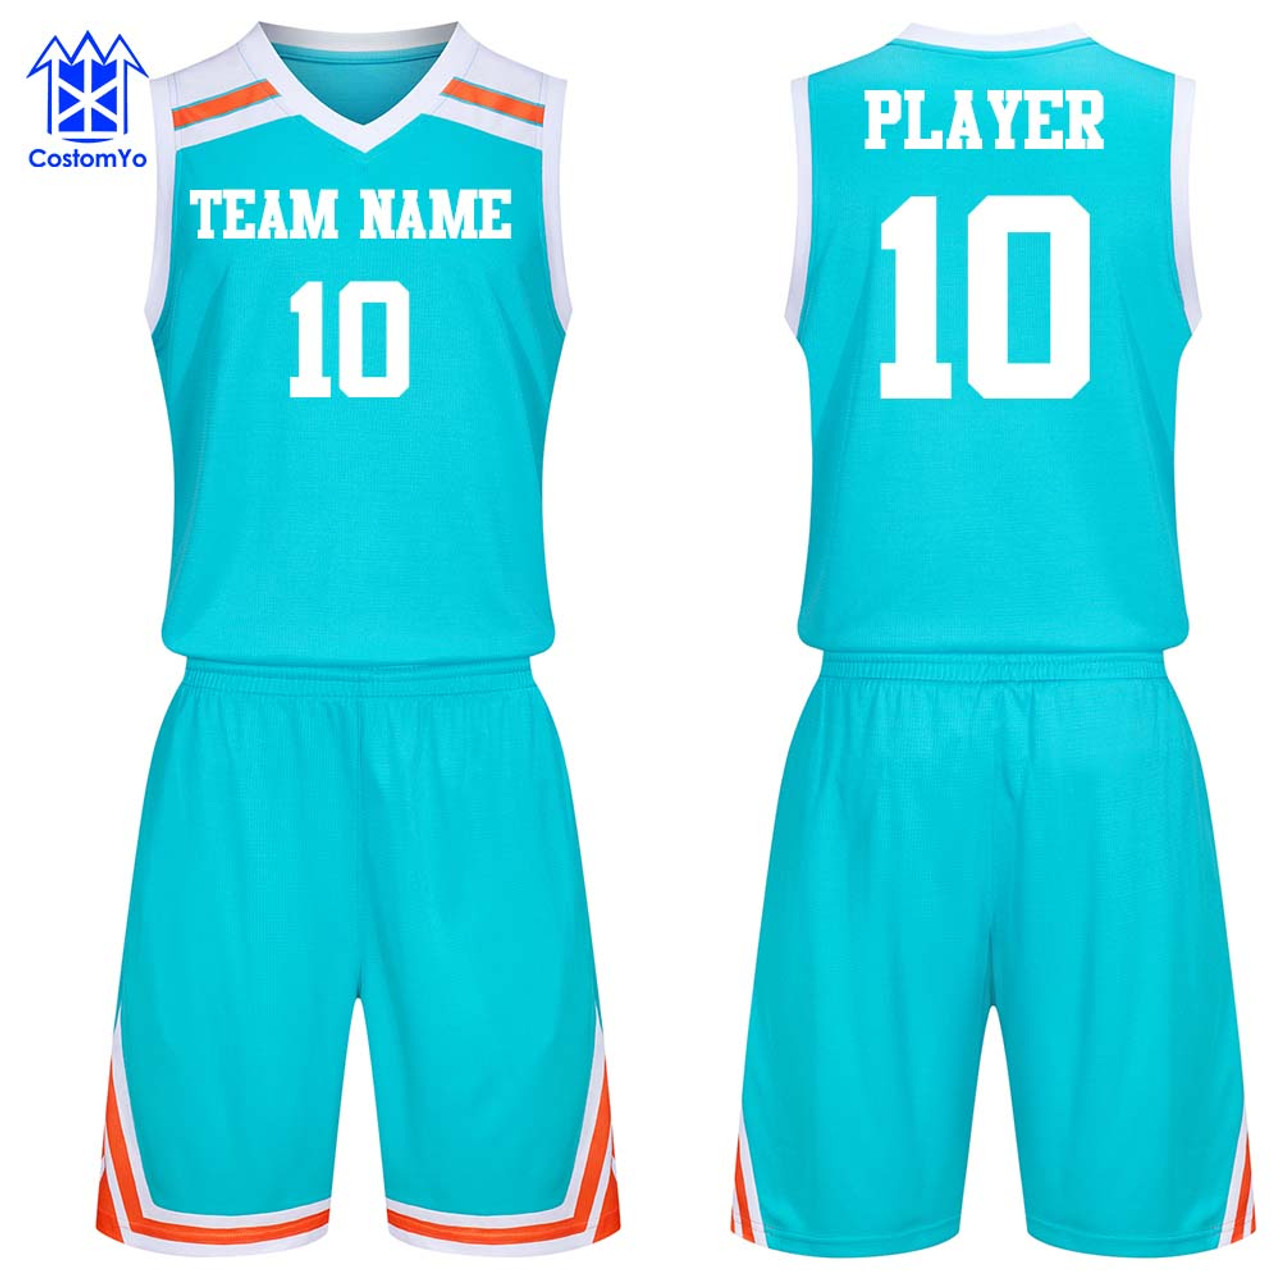 Kids Basketball Outfit For Boys Girls Cute Funny Animal Monkey Printed  Customizable Name Number Jerseys Shorts Uniforms Children